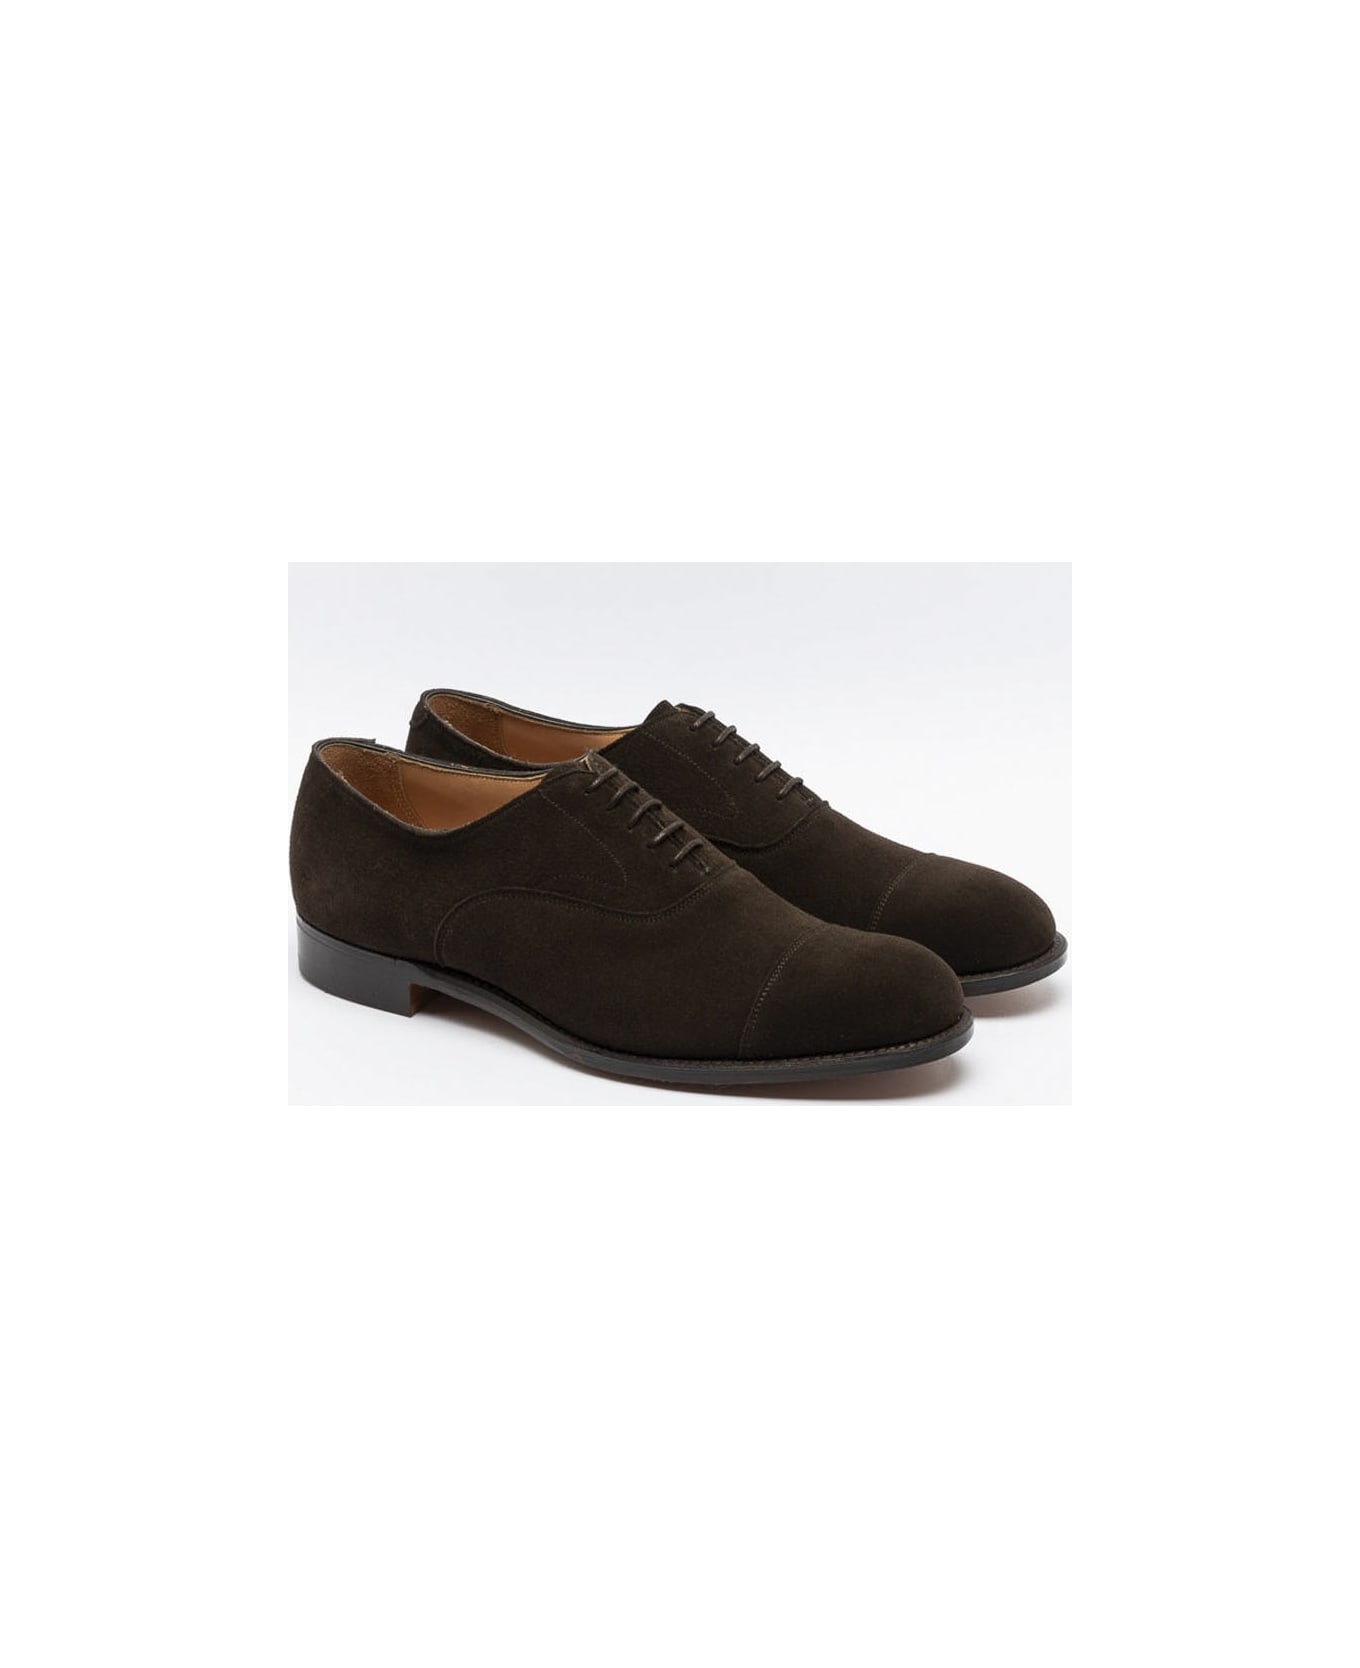 Cheaney Bitter Chocolate Suede Shoe - Marrone